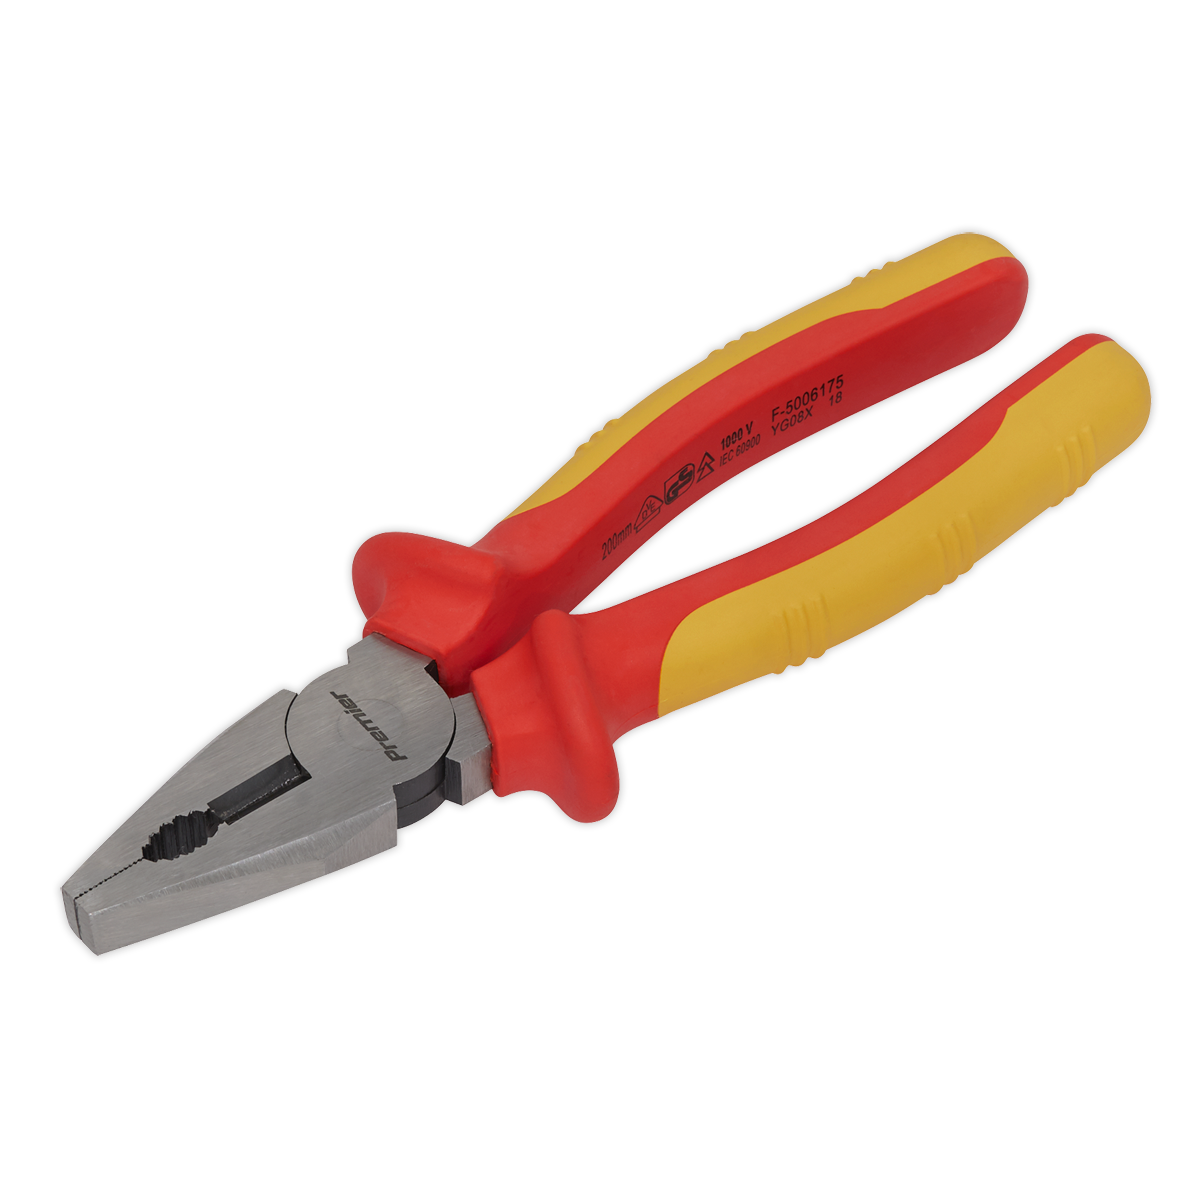 Sealey Combination Pliers 200mm VDE Approved